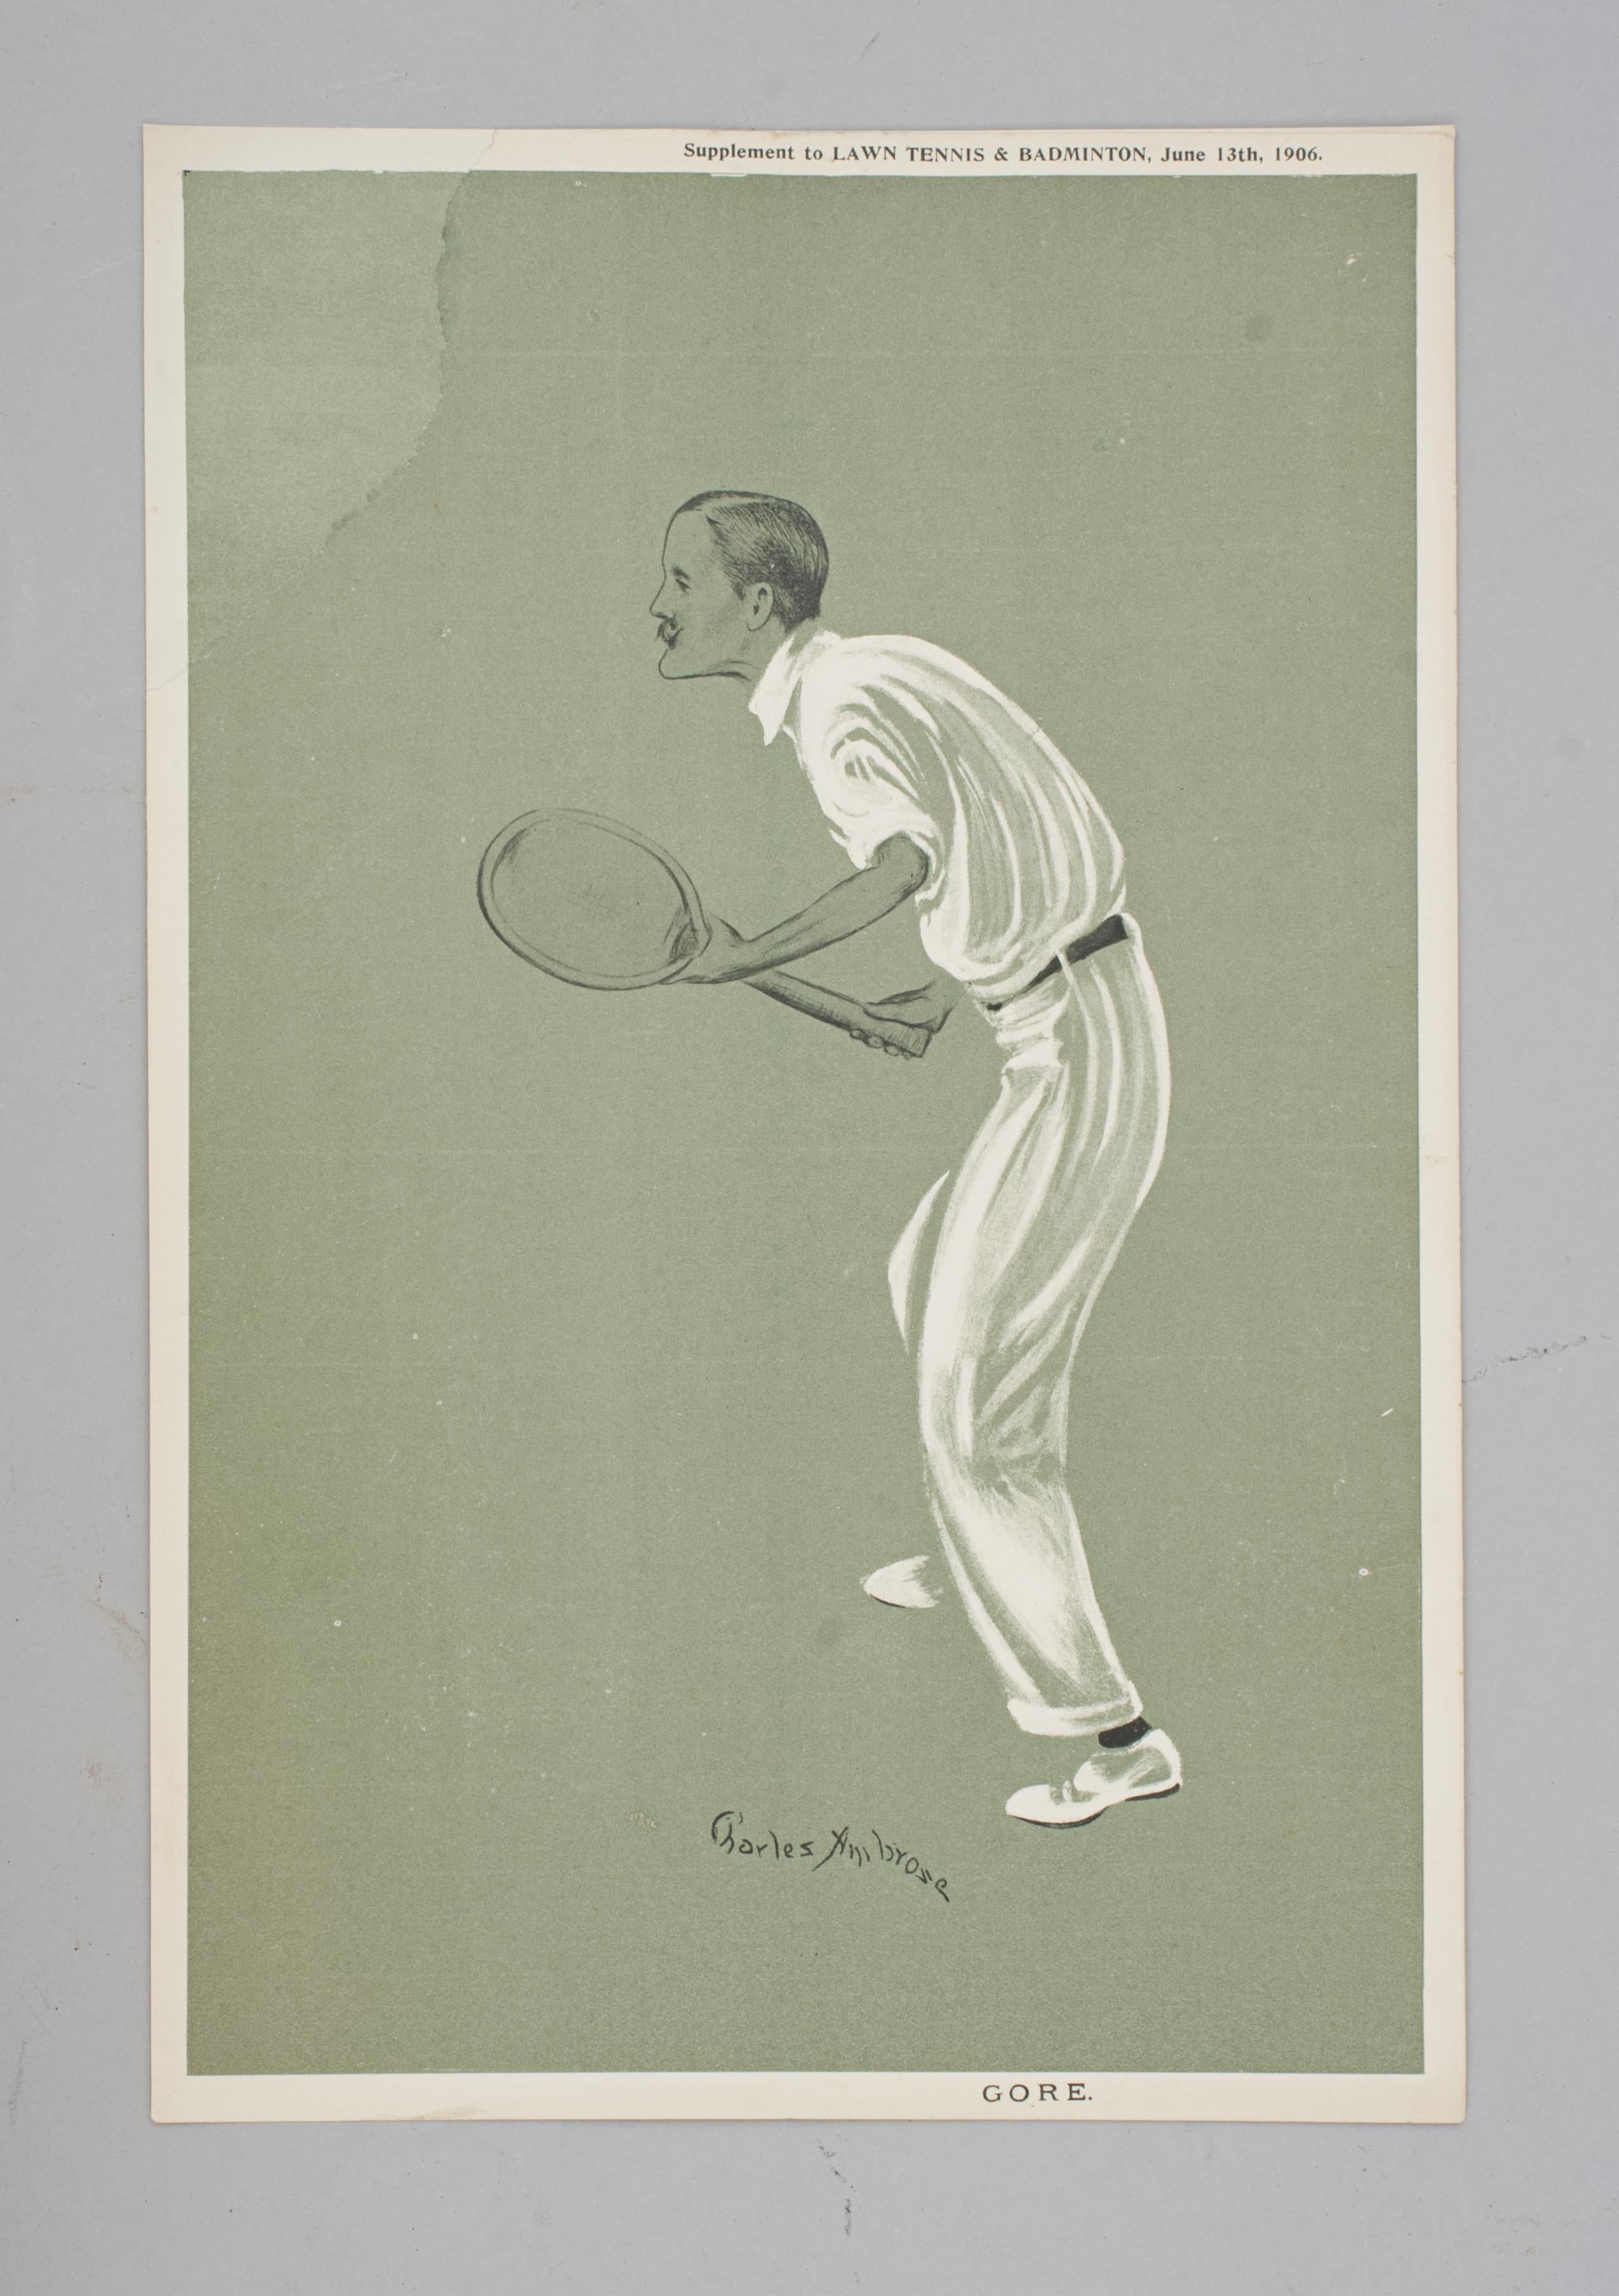 Paper Collection of Ten Tennis Prints by Charles Ambrose For Sale